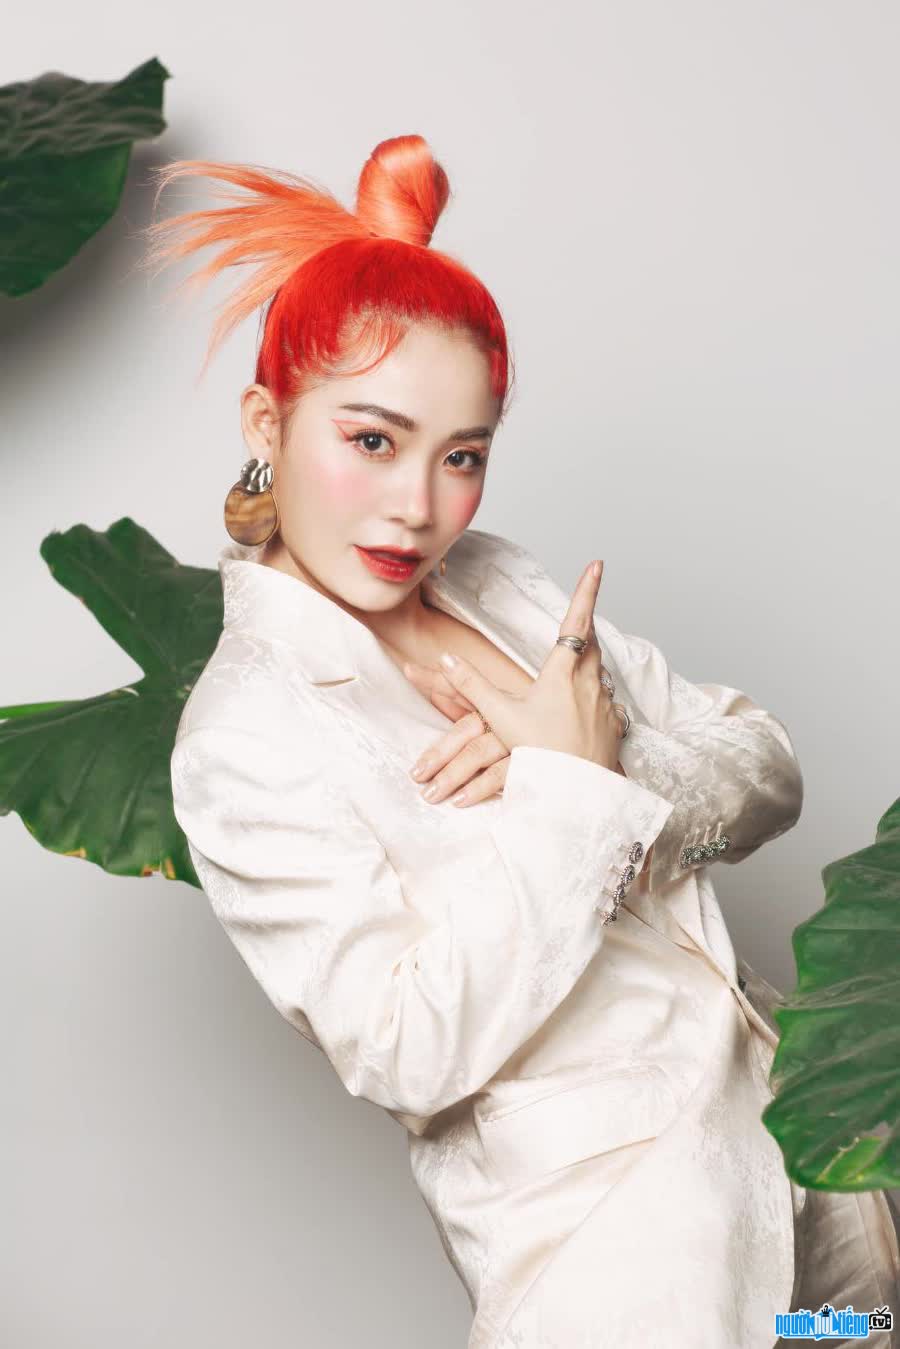 Duong Tay is luxurious with impressive pink hair